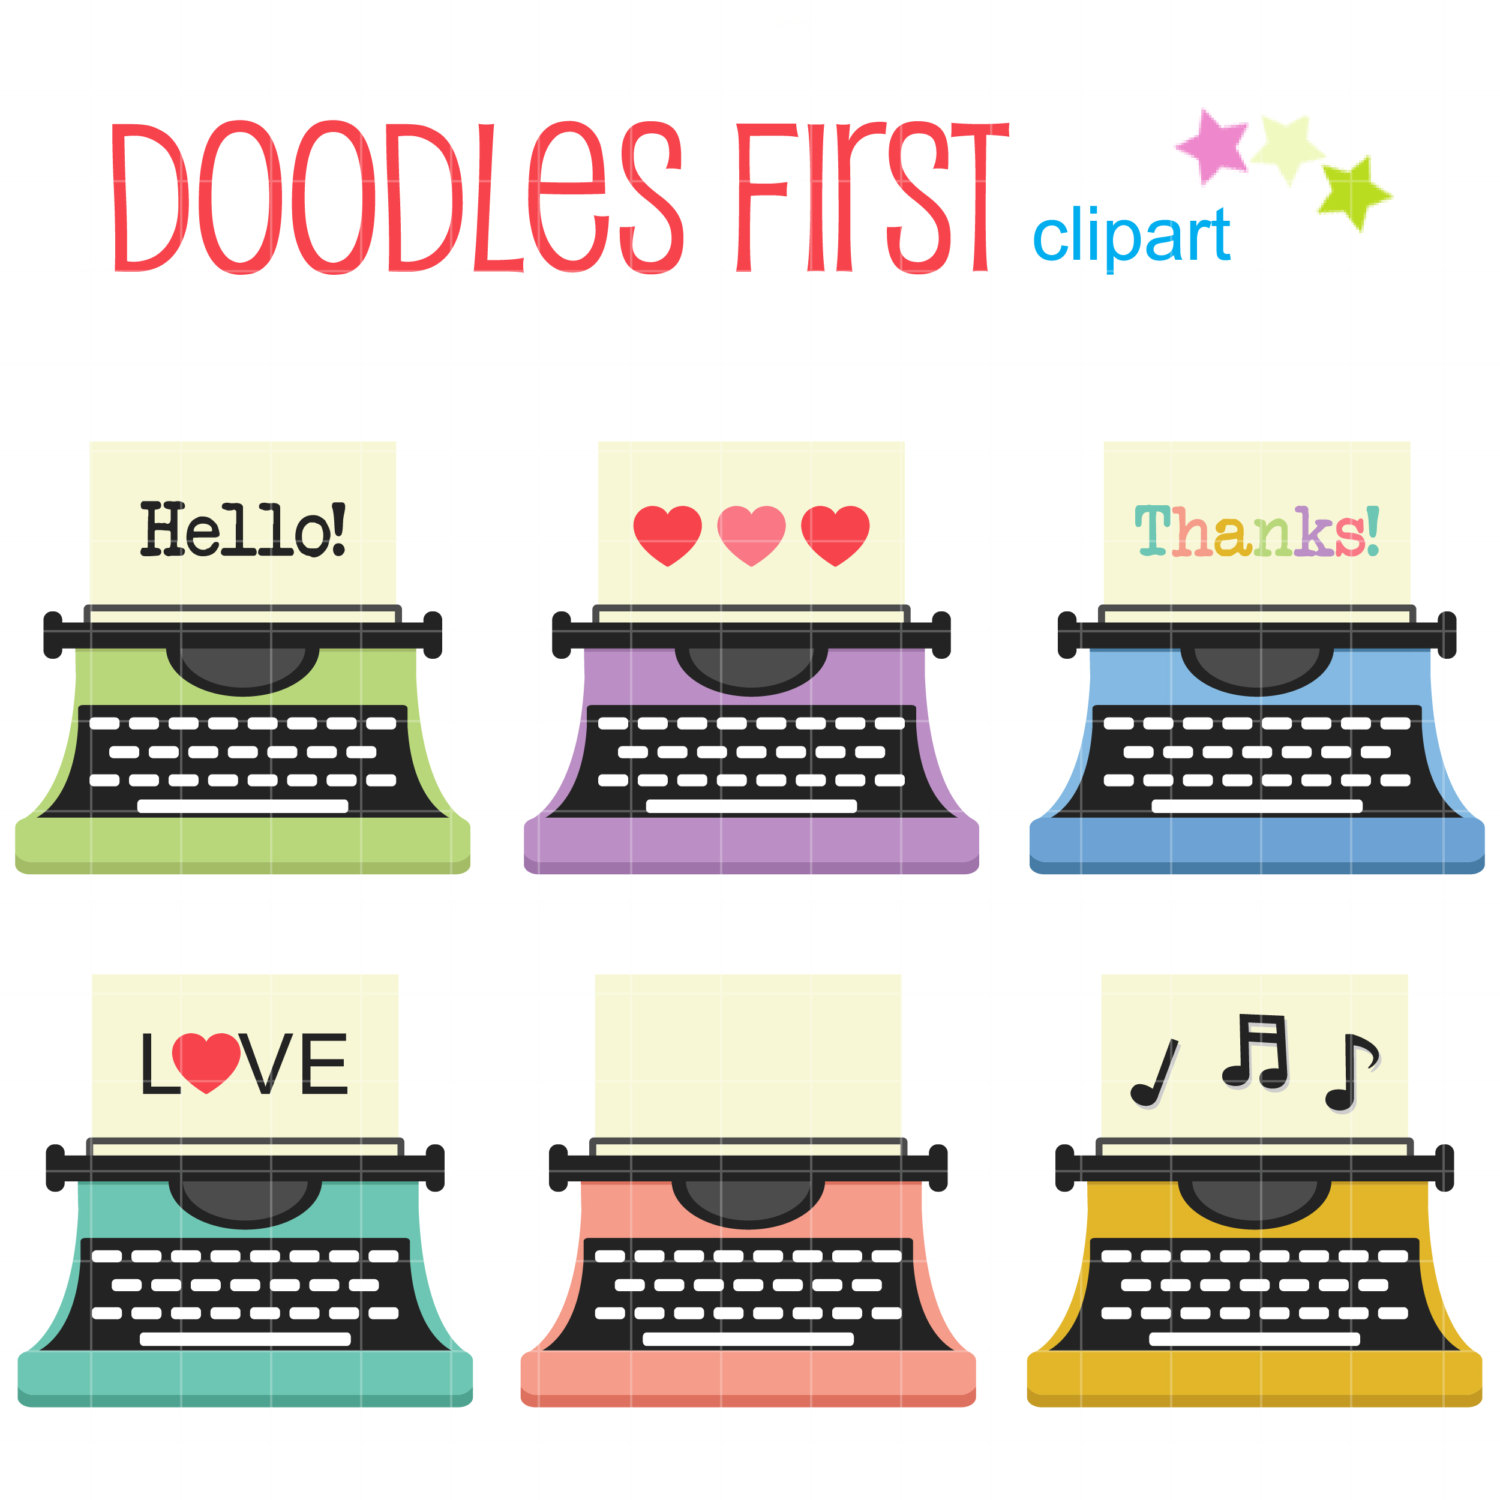 Colorful Typewriters Digital Clip Art for by DoodlesFirst on Etsy